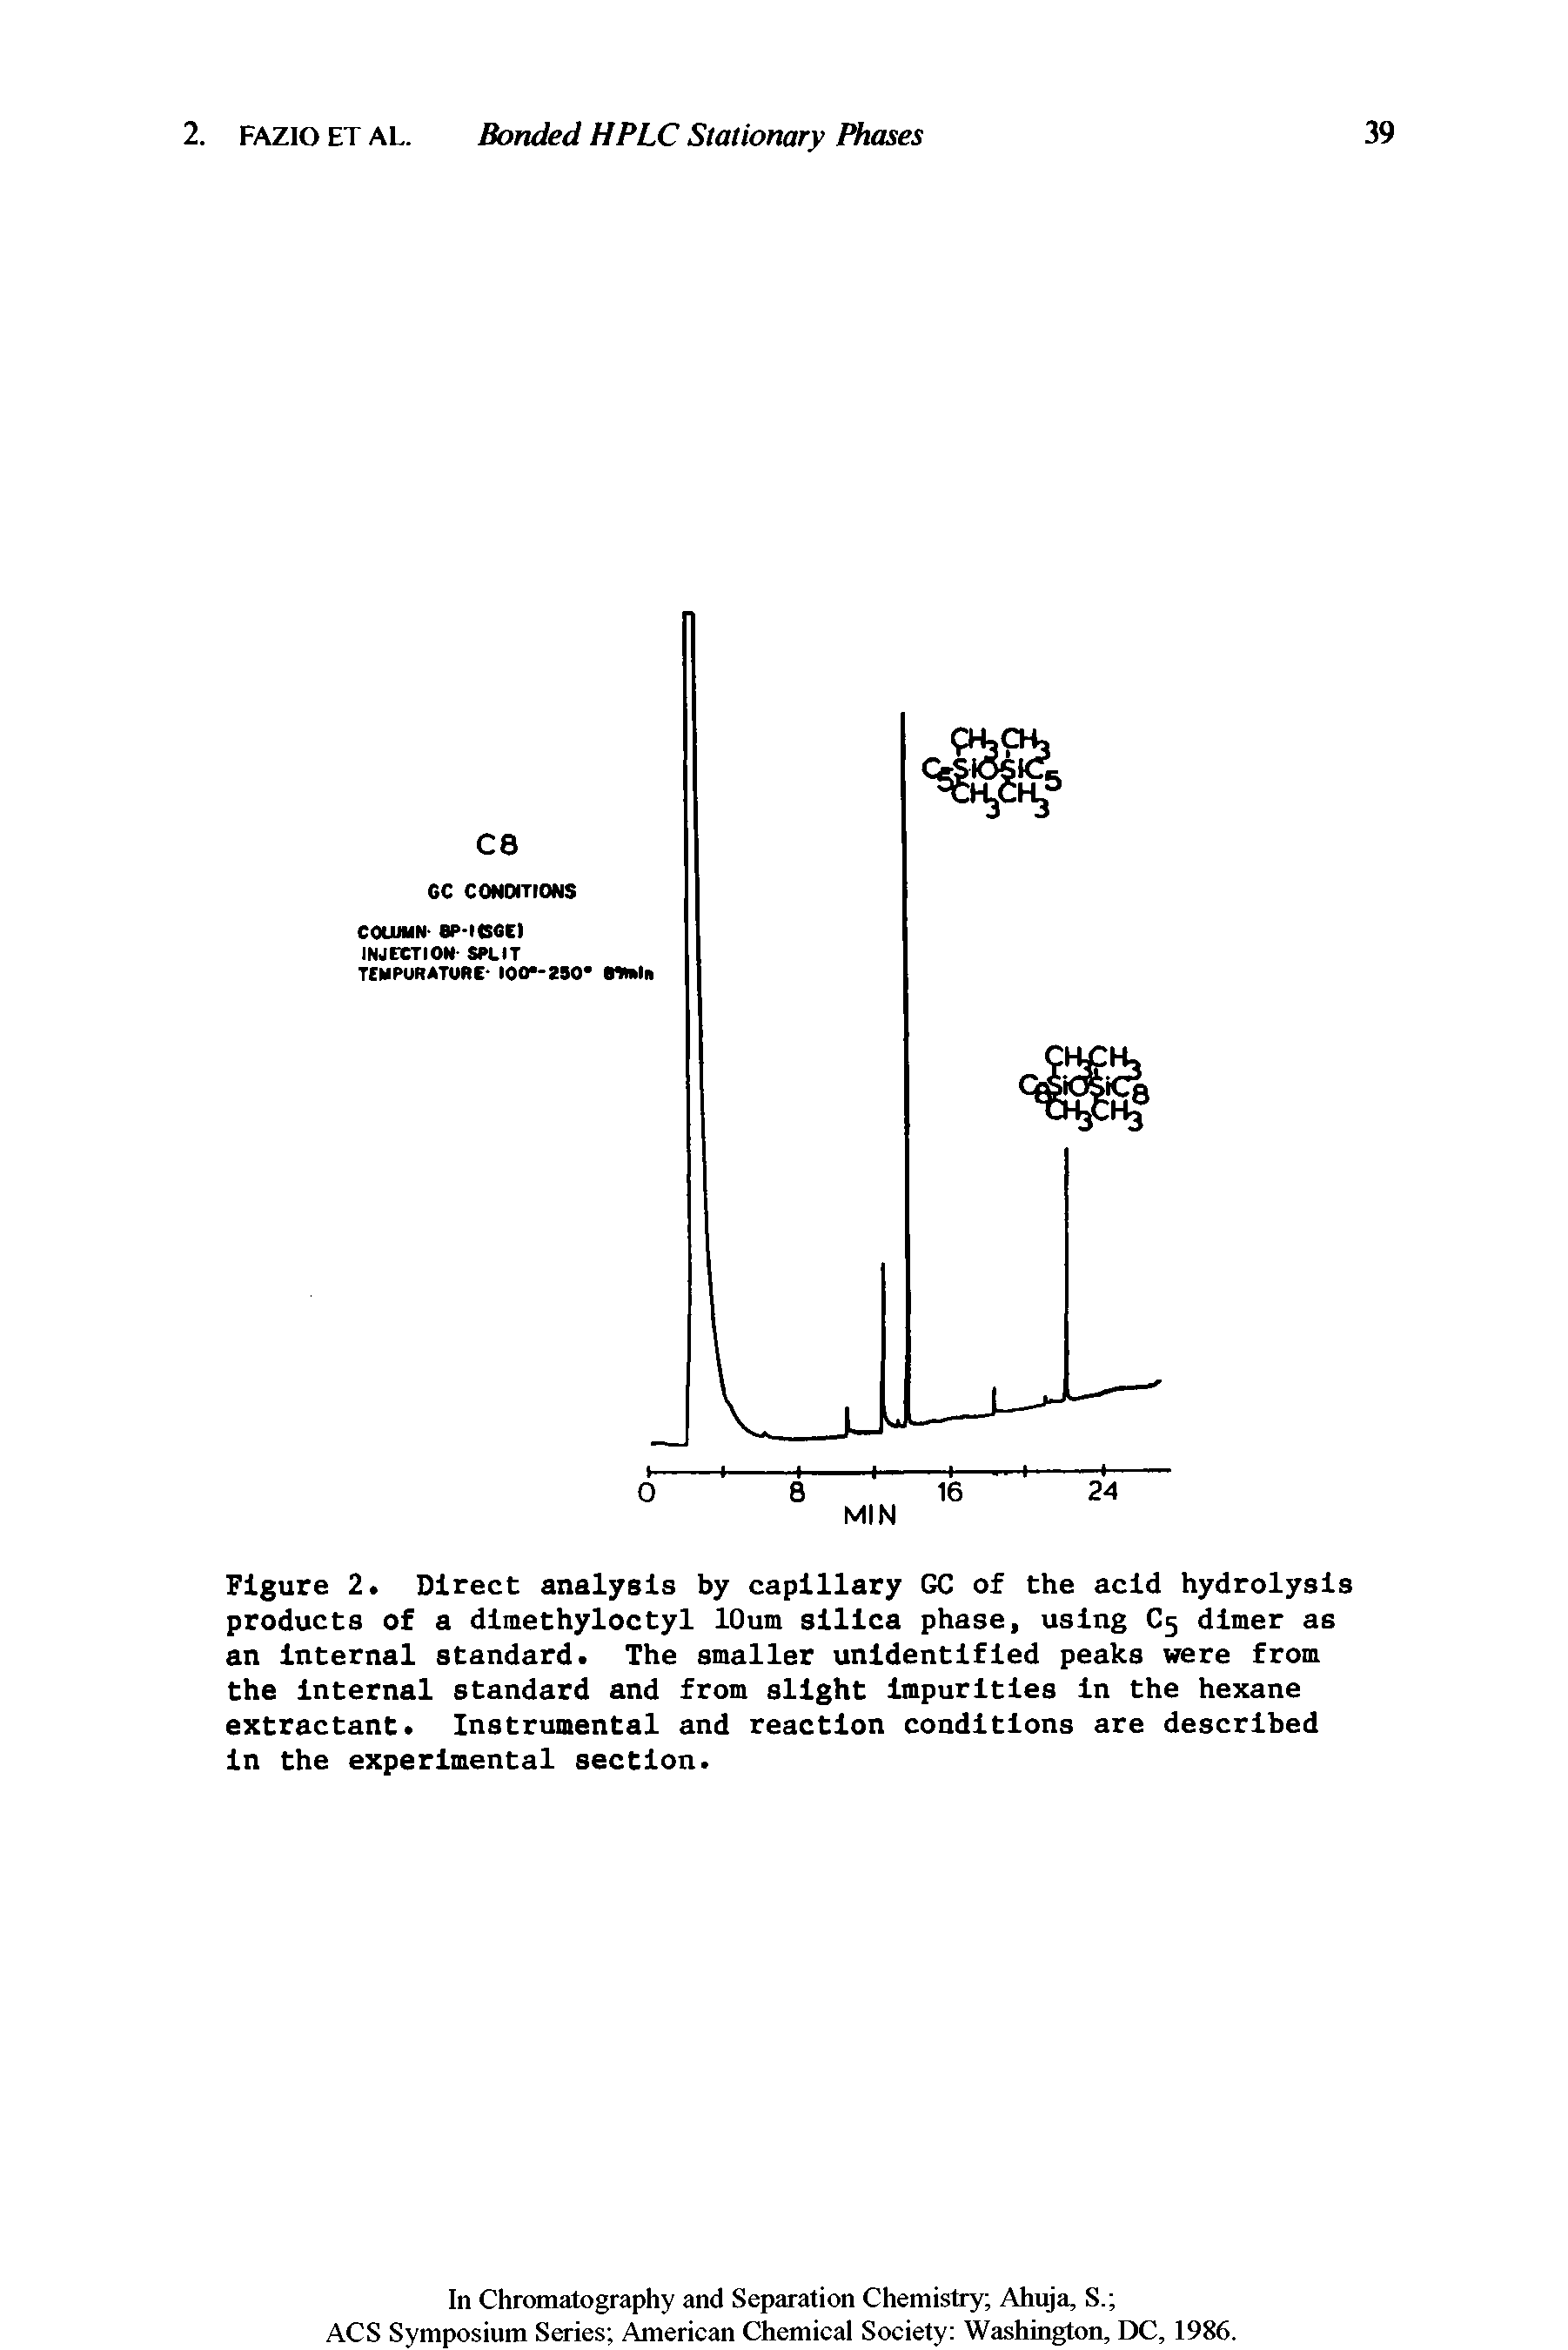 Figure 2. Direct analysis by capillary GC of the acid hydrolysis products of a dlmethyloctyl lOum silica phase, using C5 dimer as an Internal standard. The smaller unidentified peaks were from the Internal standard and from slight Impurities in the hexane extractant. Instrumental and reaction conditions are described In the experimental section.